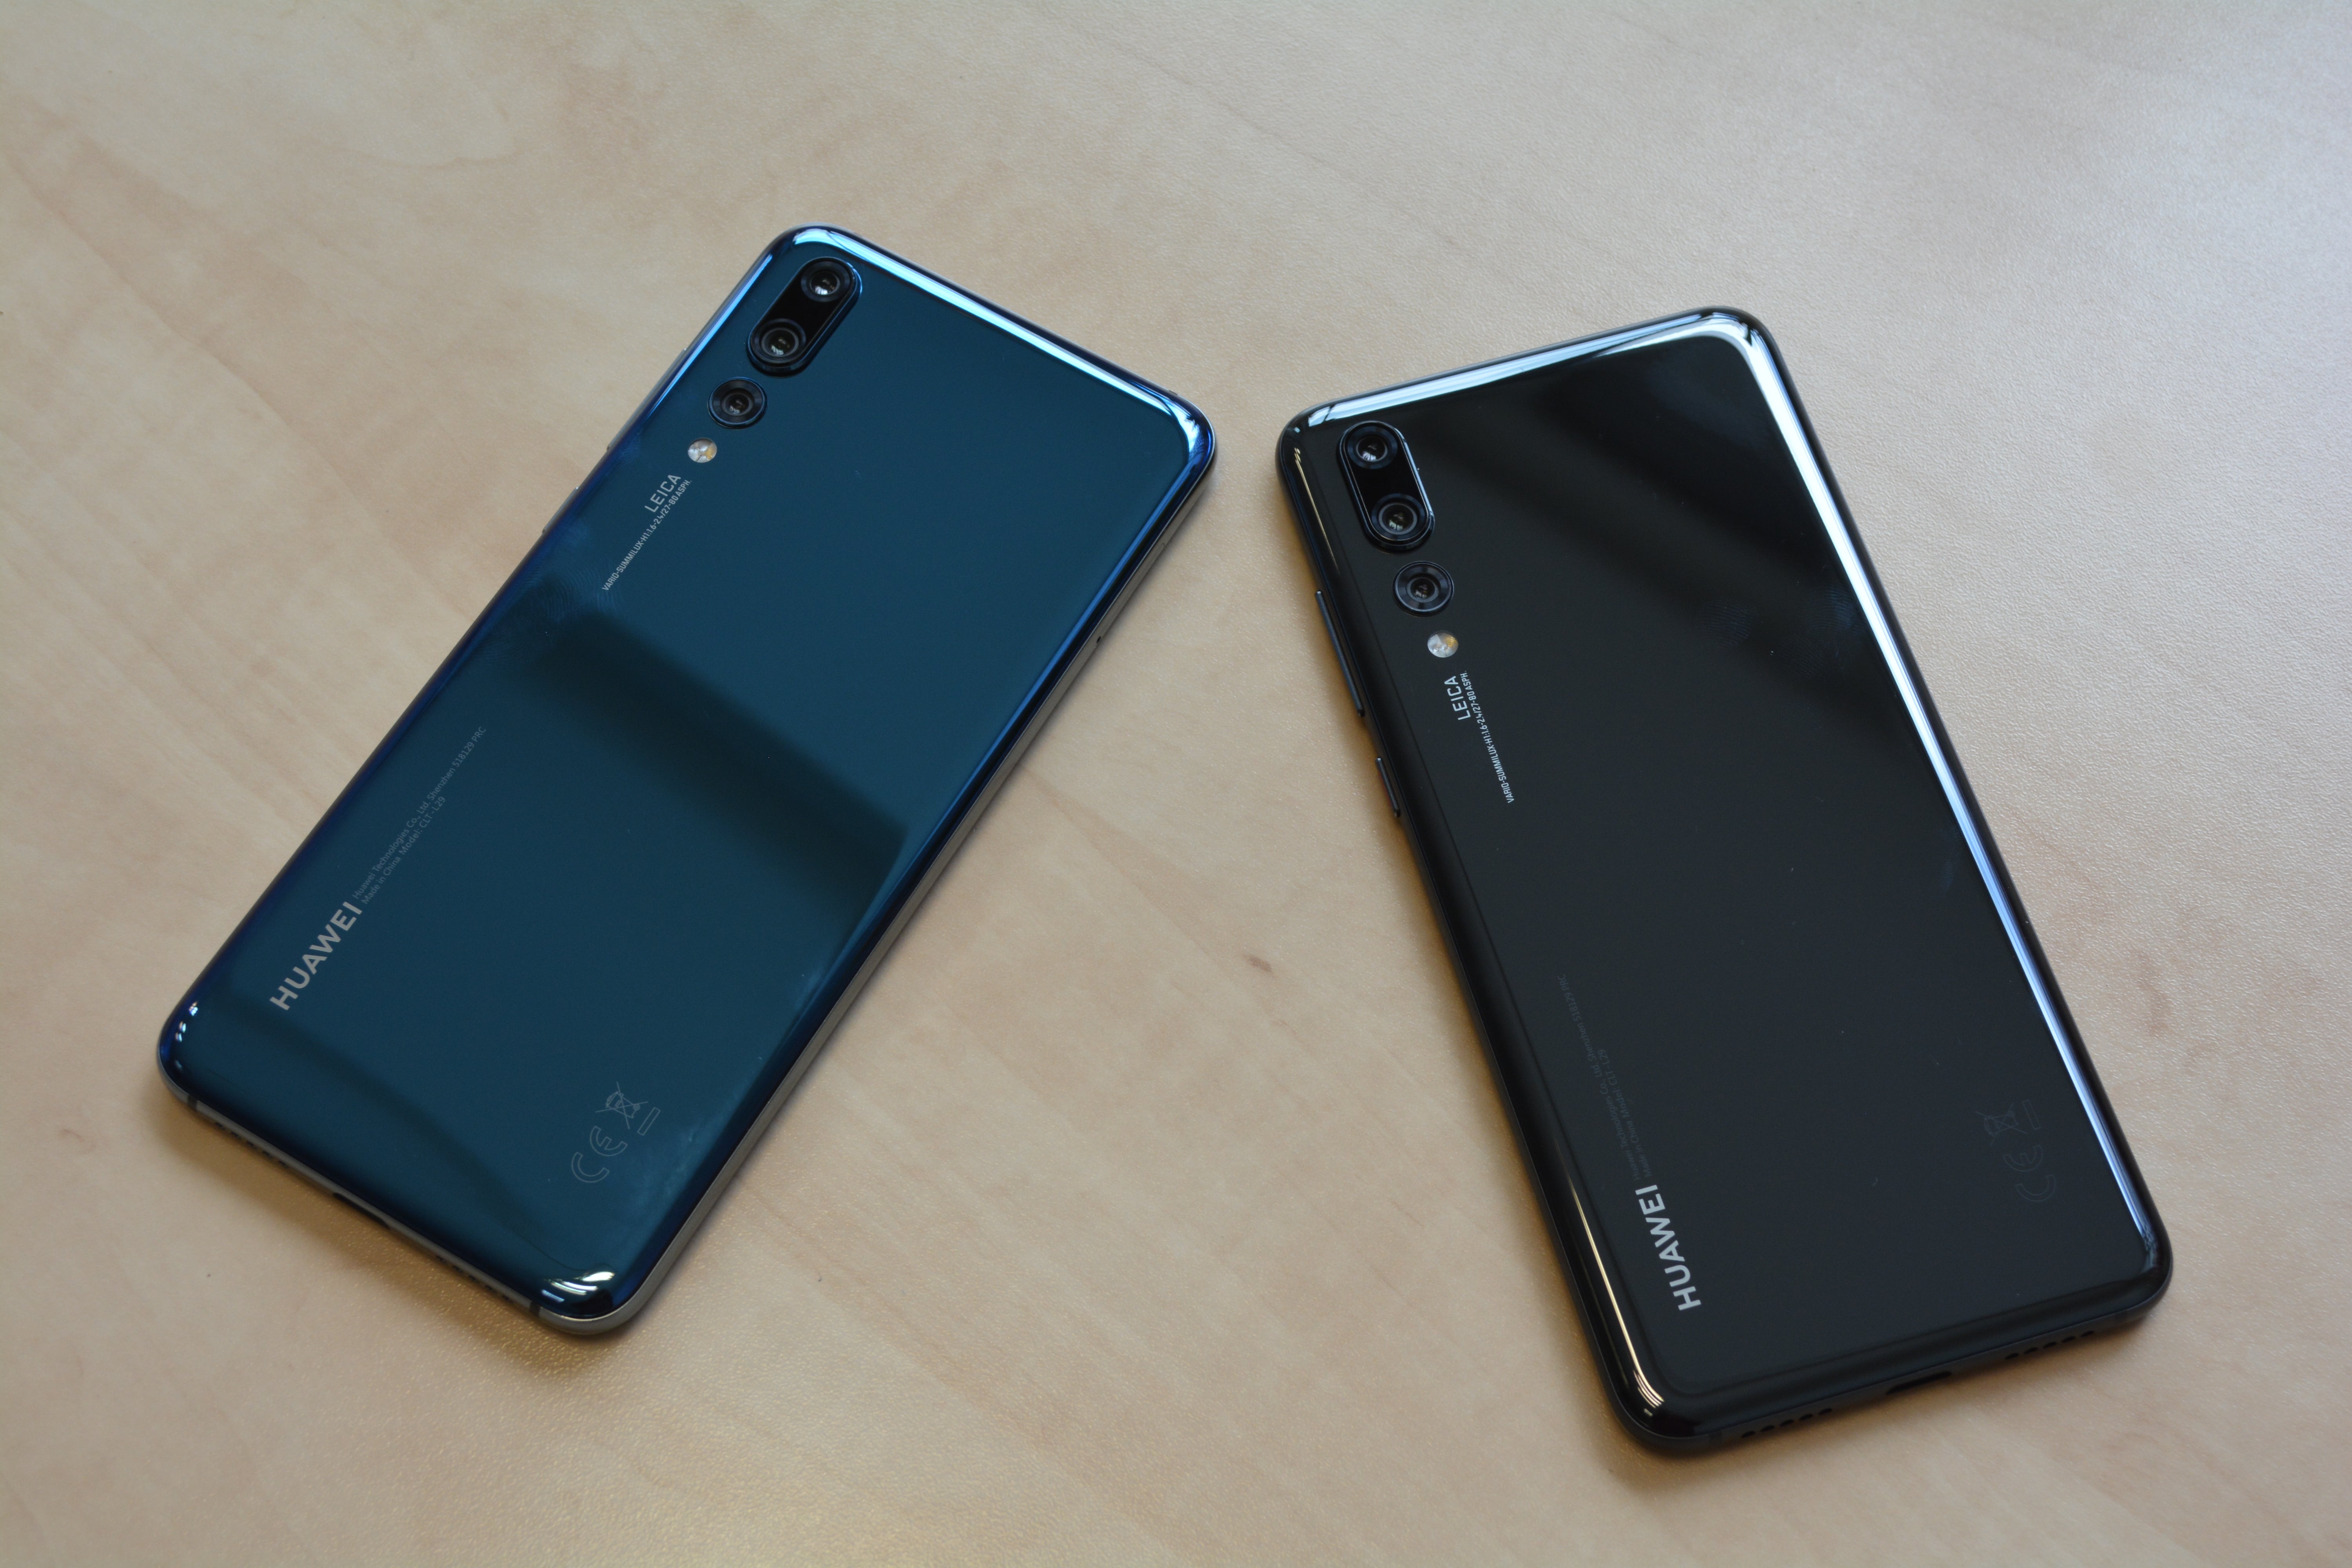 Er is behoefte aan Luipaard Bezwaar Huawei P20 Pro Review: Battery Life and Verdict | Trusted Reviews